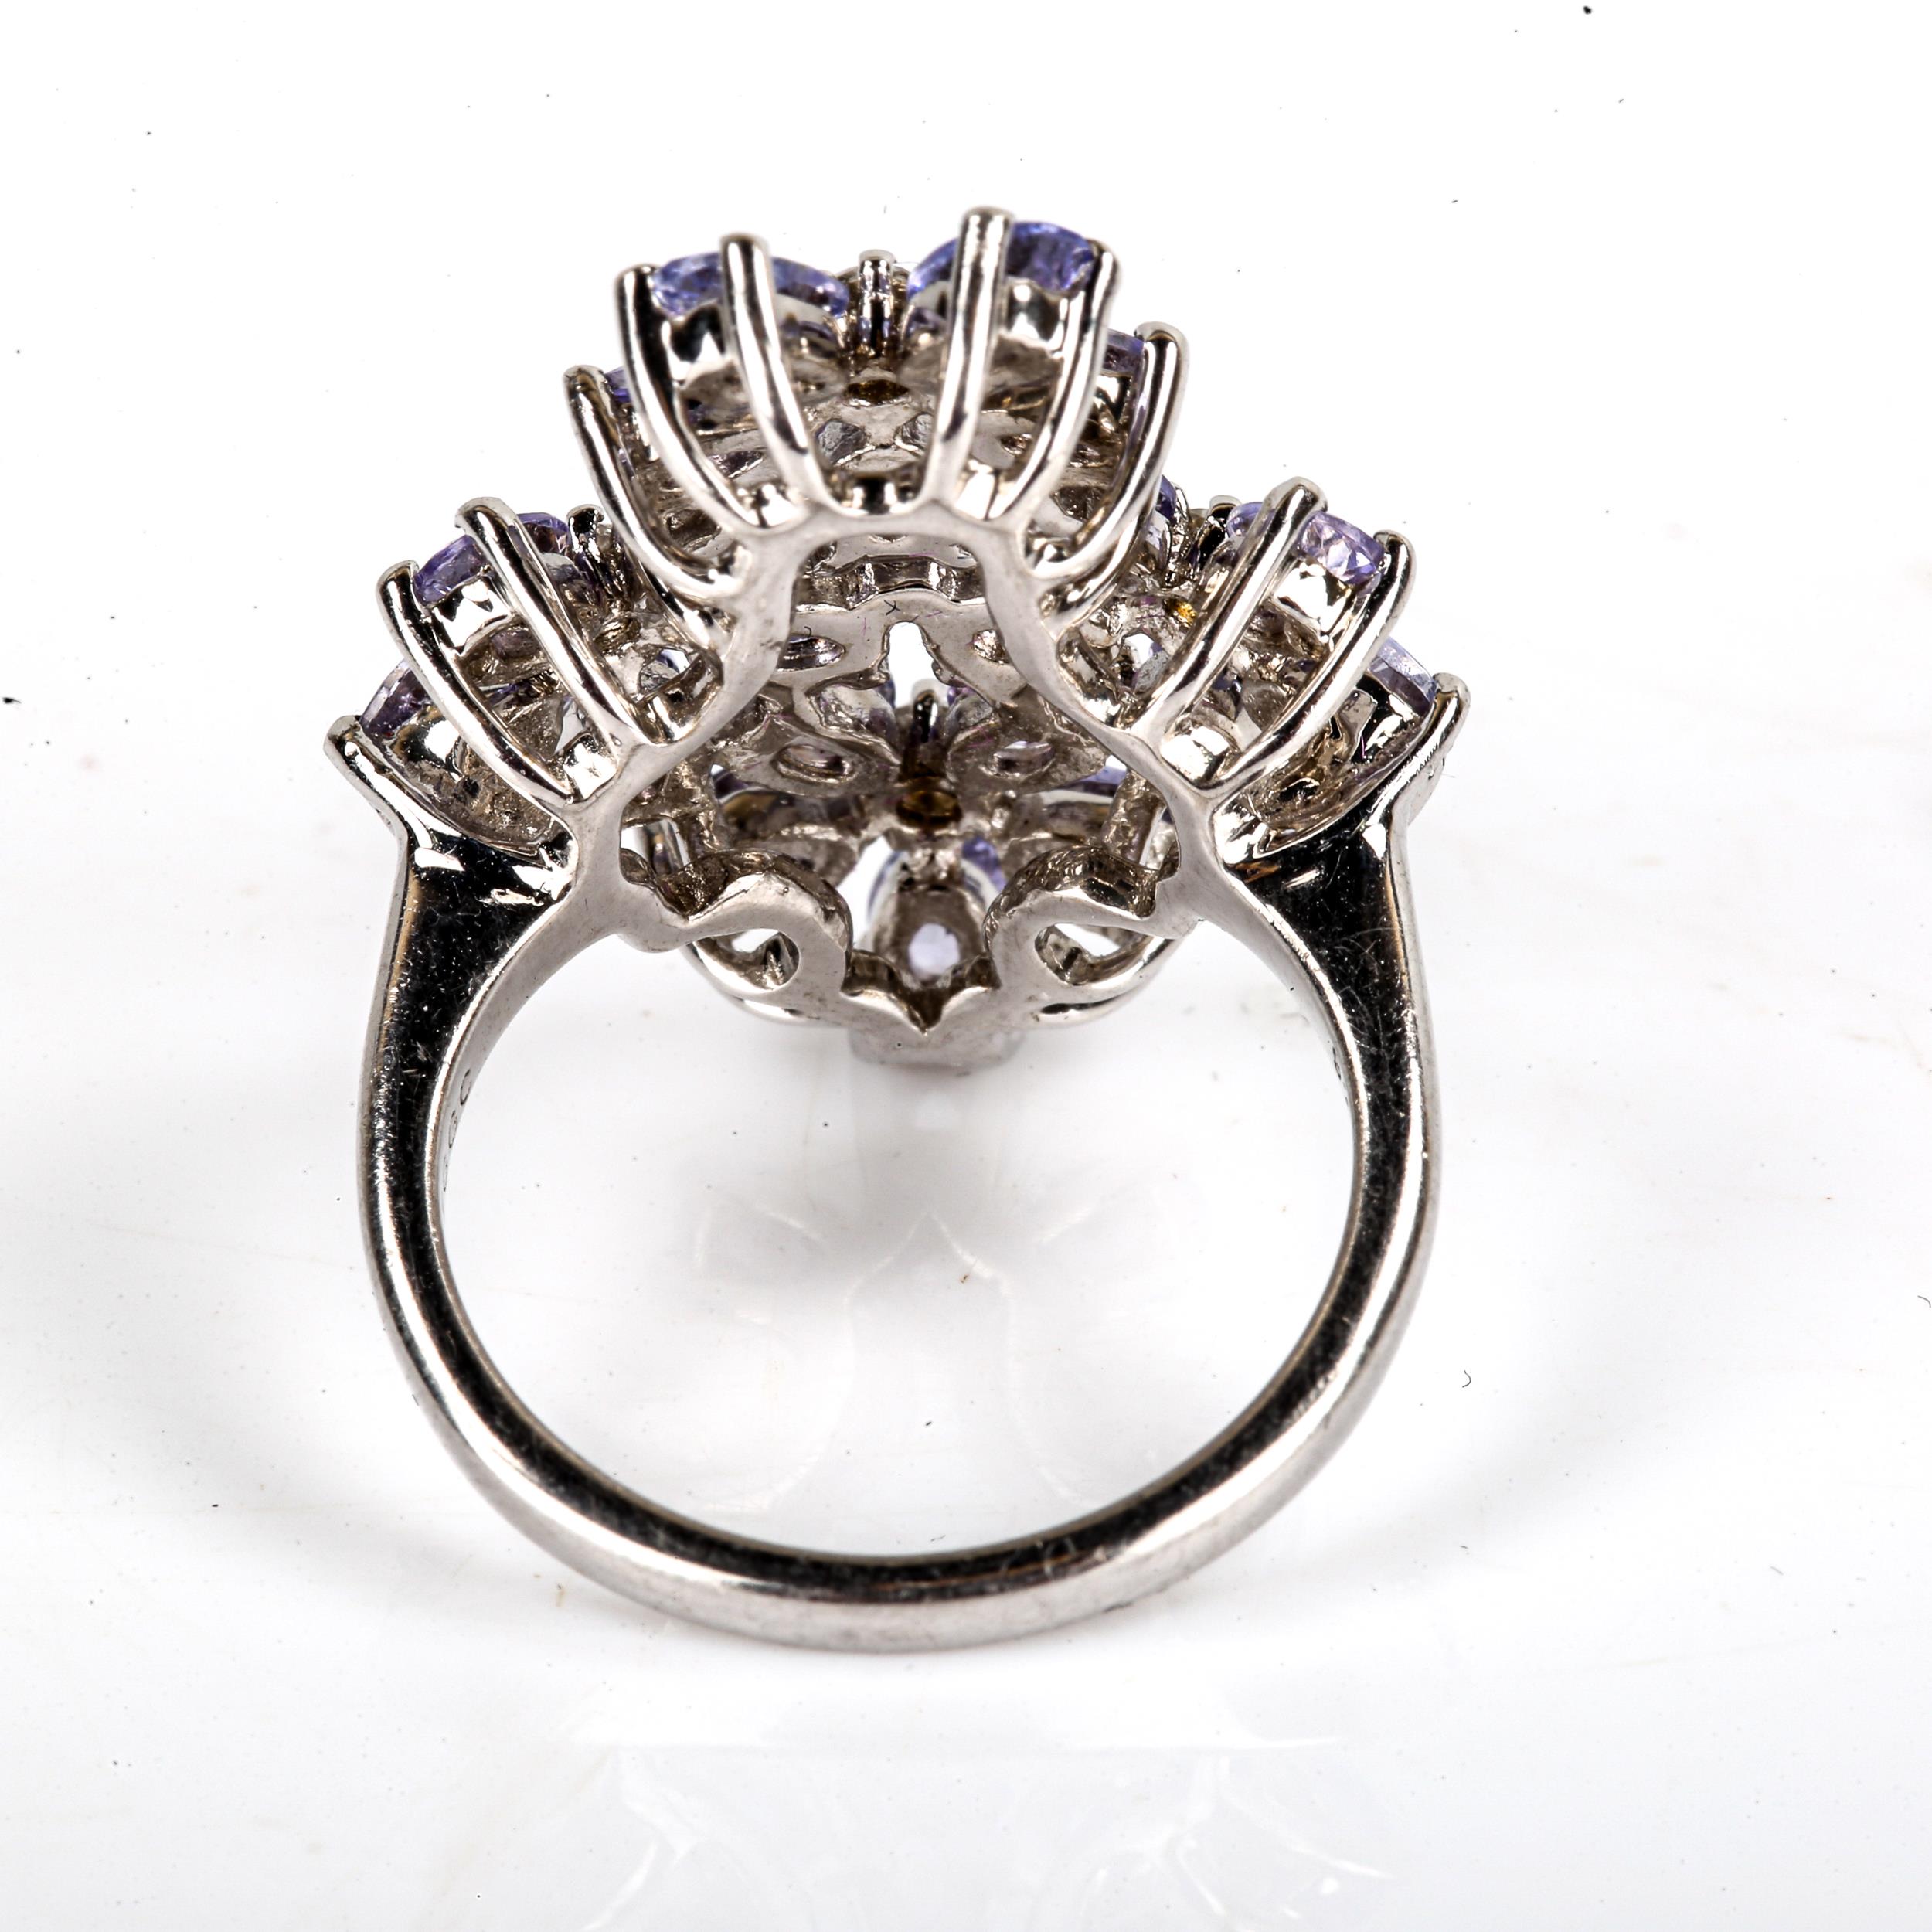 A large modern sterling silver tanzanite and cubic zirconia flowerhead ring, set with oval-cut - Image 3 of 4